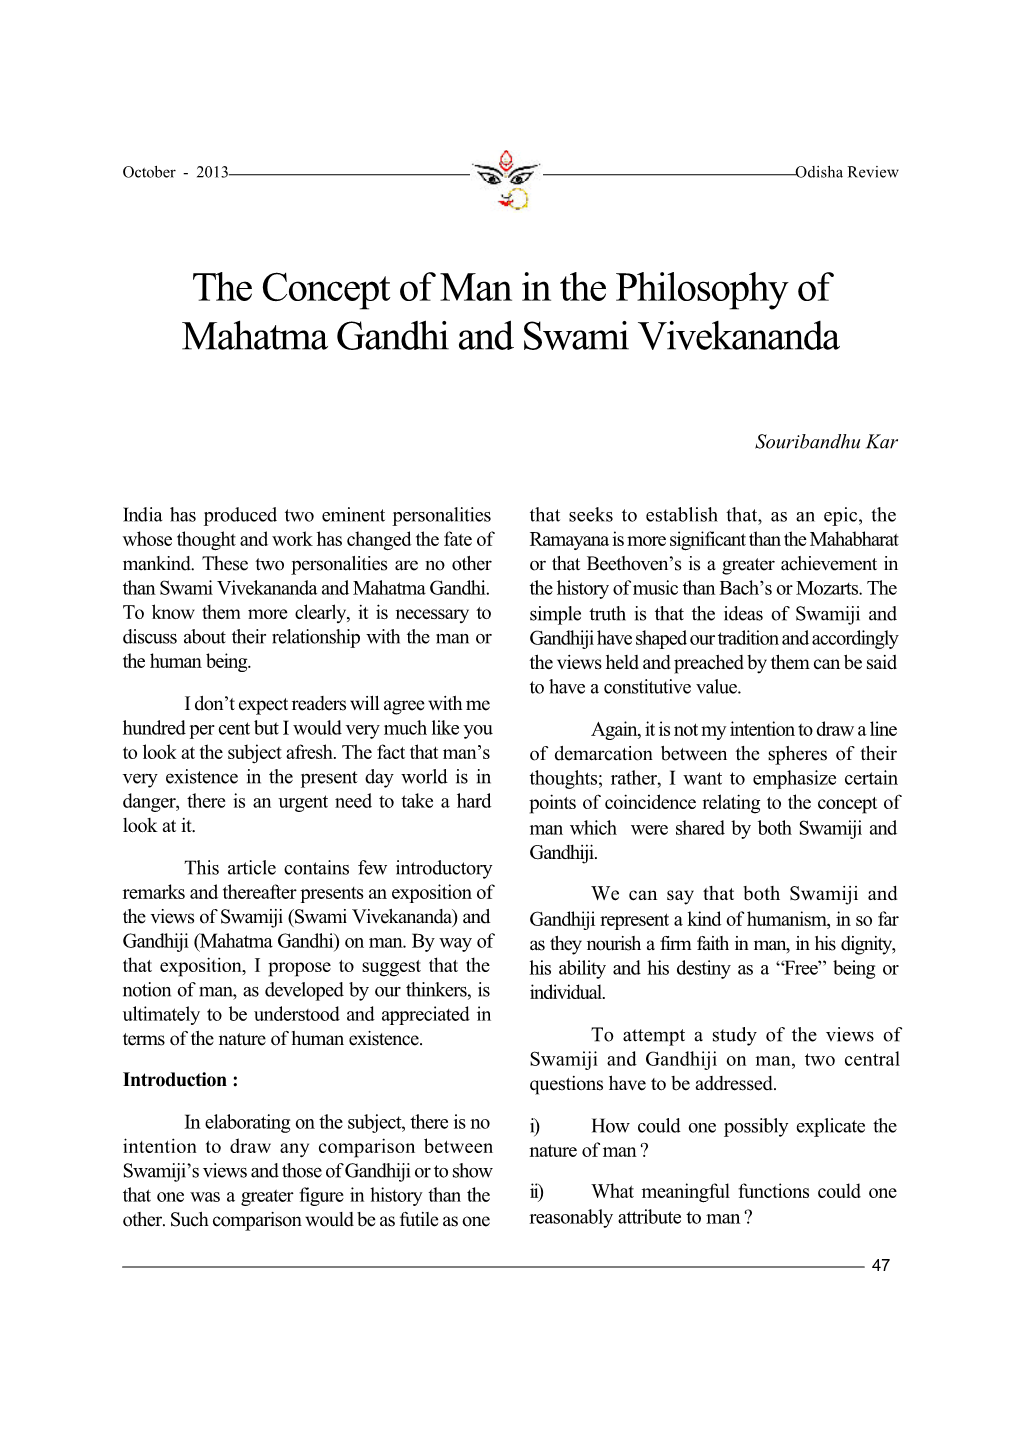 The Concept of Man in the Philosophy of Mahatma Gandhi and Swami Vivekananda